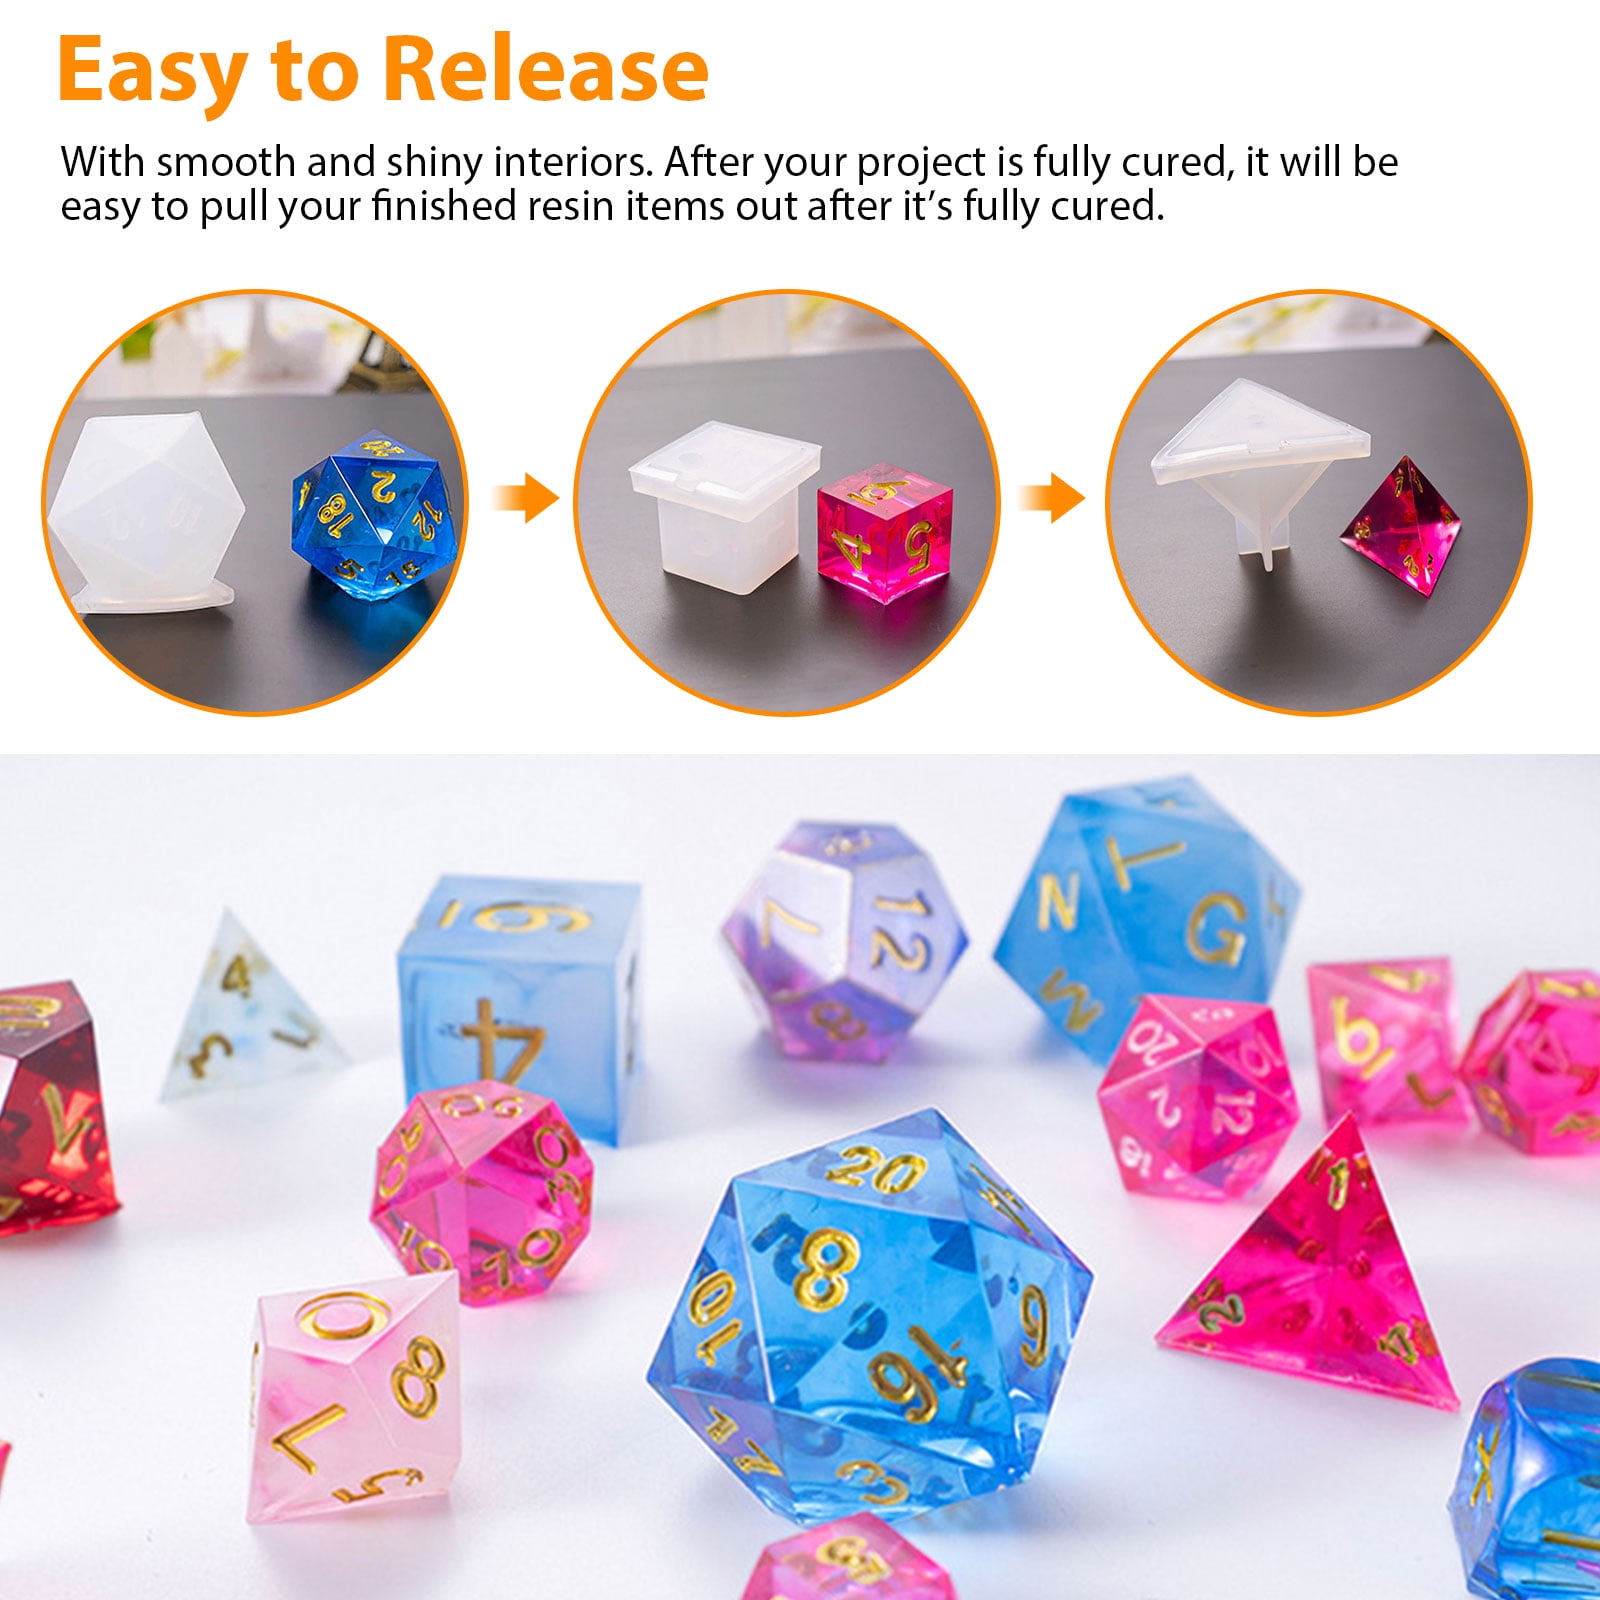  JEYUQAXY Large Silicone Polyhedral Dice Molds 2 Styles with  D20, and D12 Silicone Resin Casting DND Dice Molds for Resin DIY Resin,  Dice, Jewelry, Candles, Crafts Board RPG Games : Arts